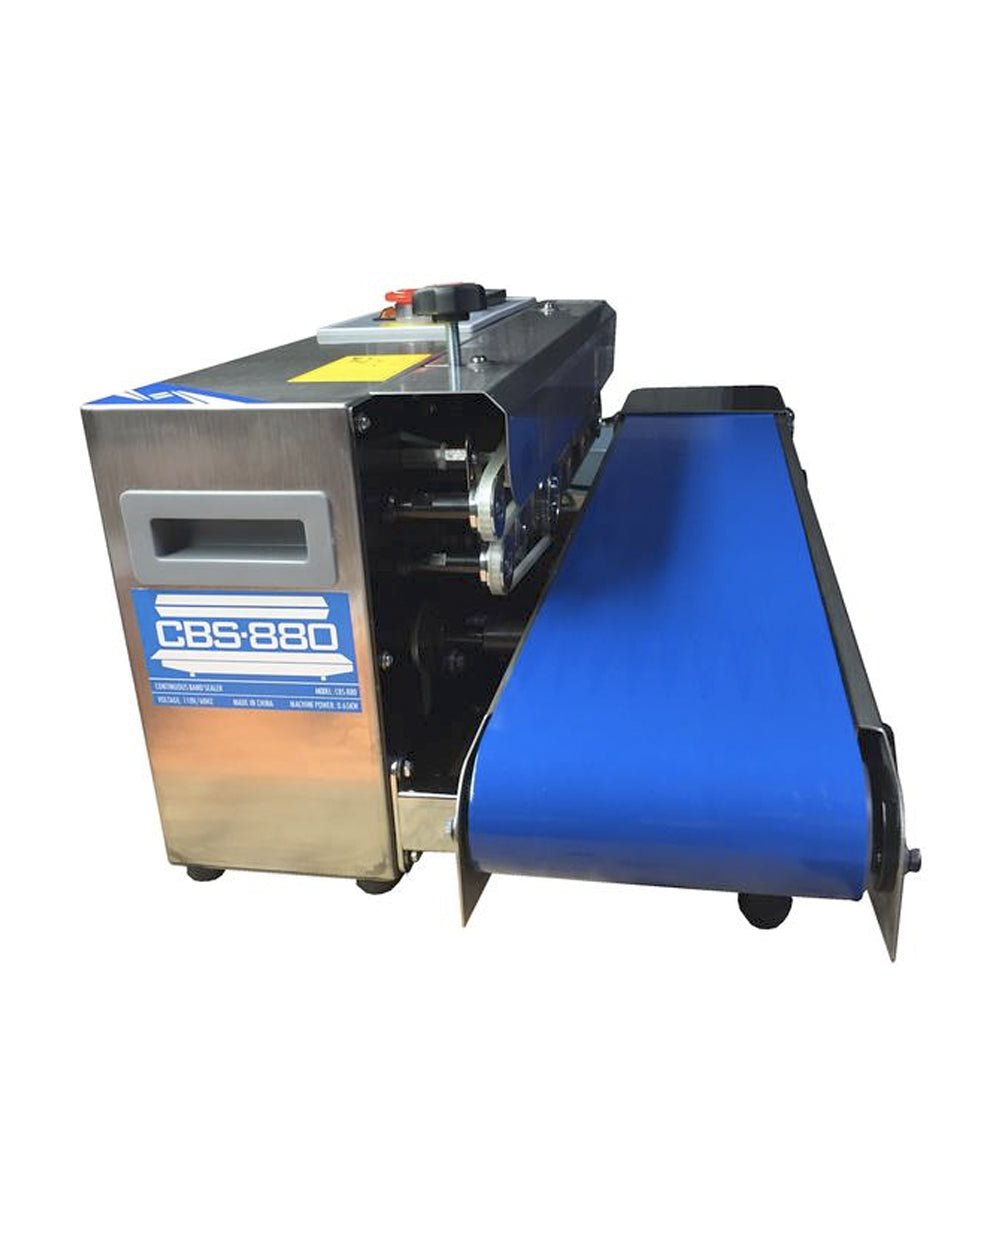 Continuous Horizontal Band Sealer Machine w/ Digital Counter | Seal 30 Bags in Under 1 Minute - 1